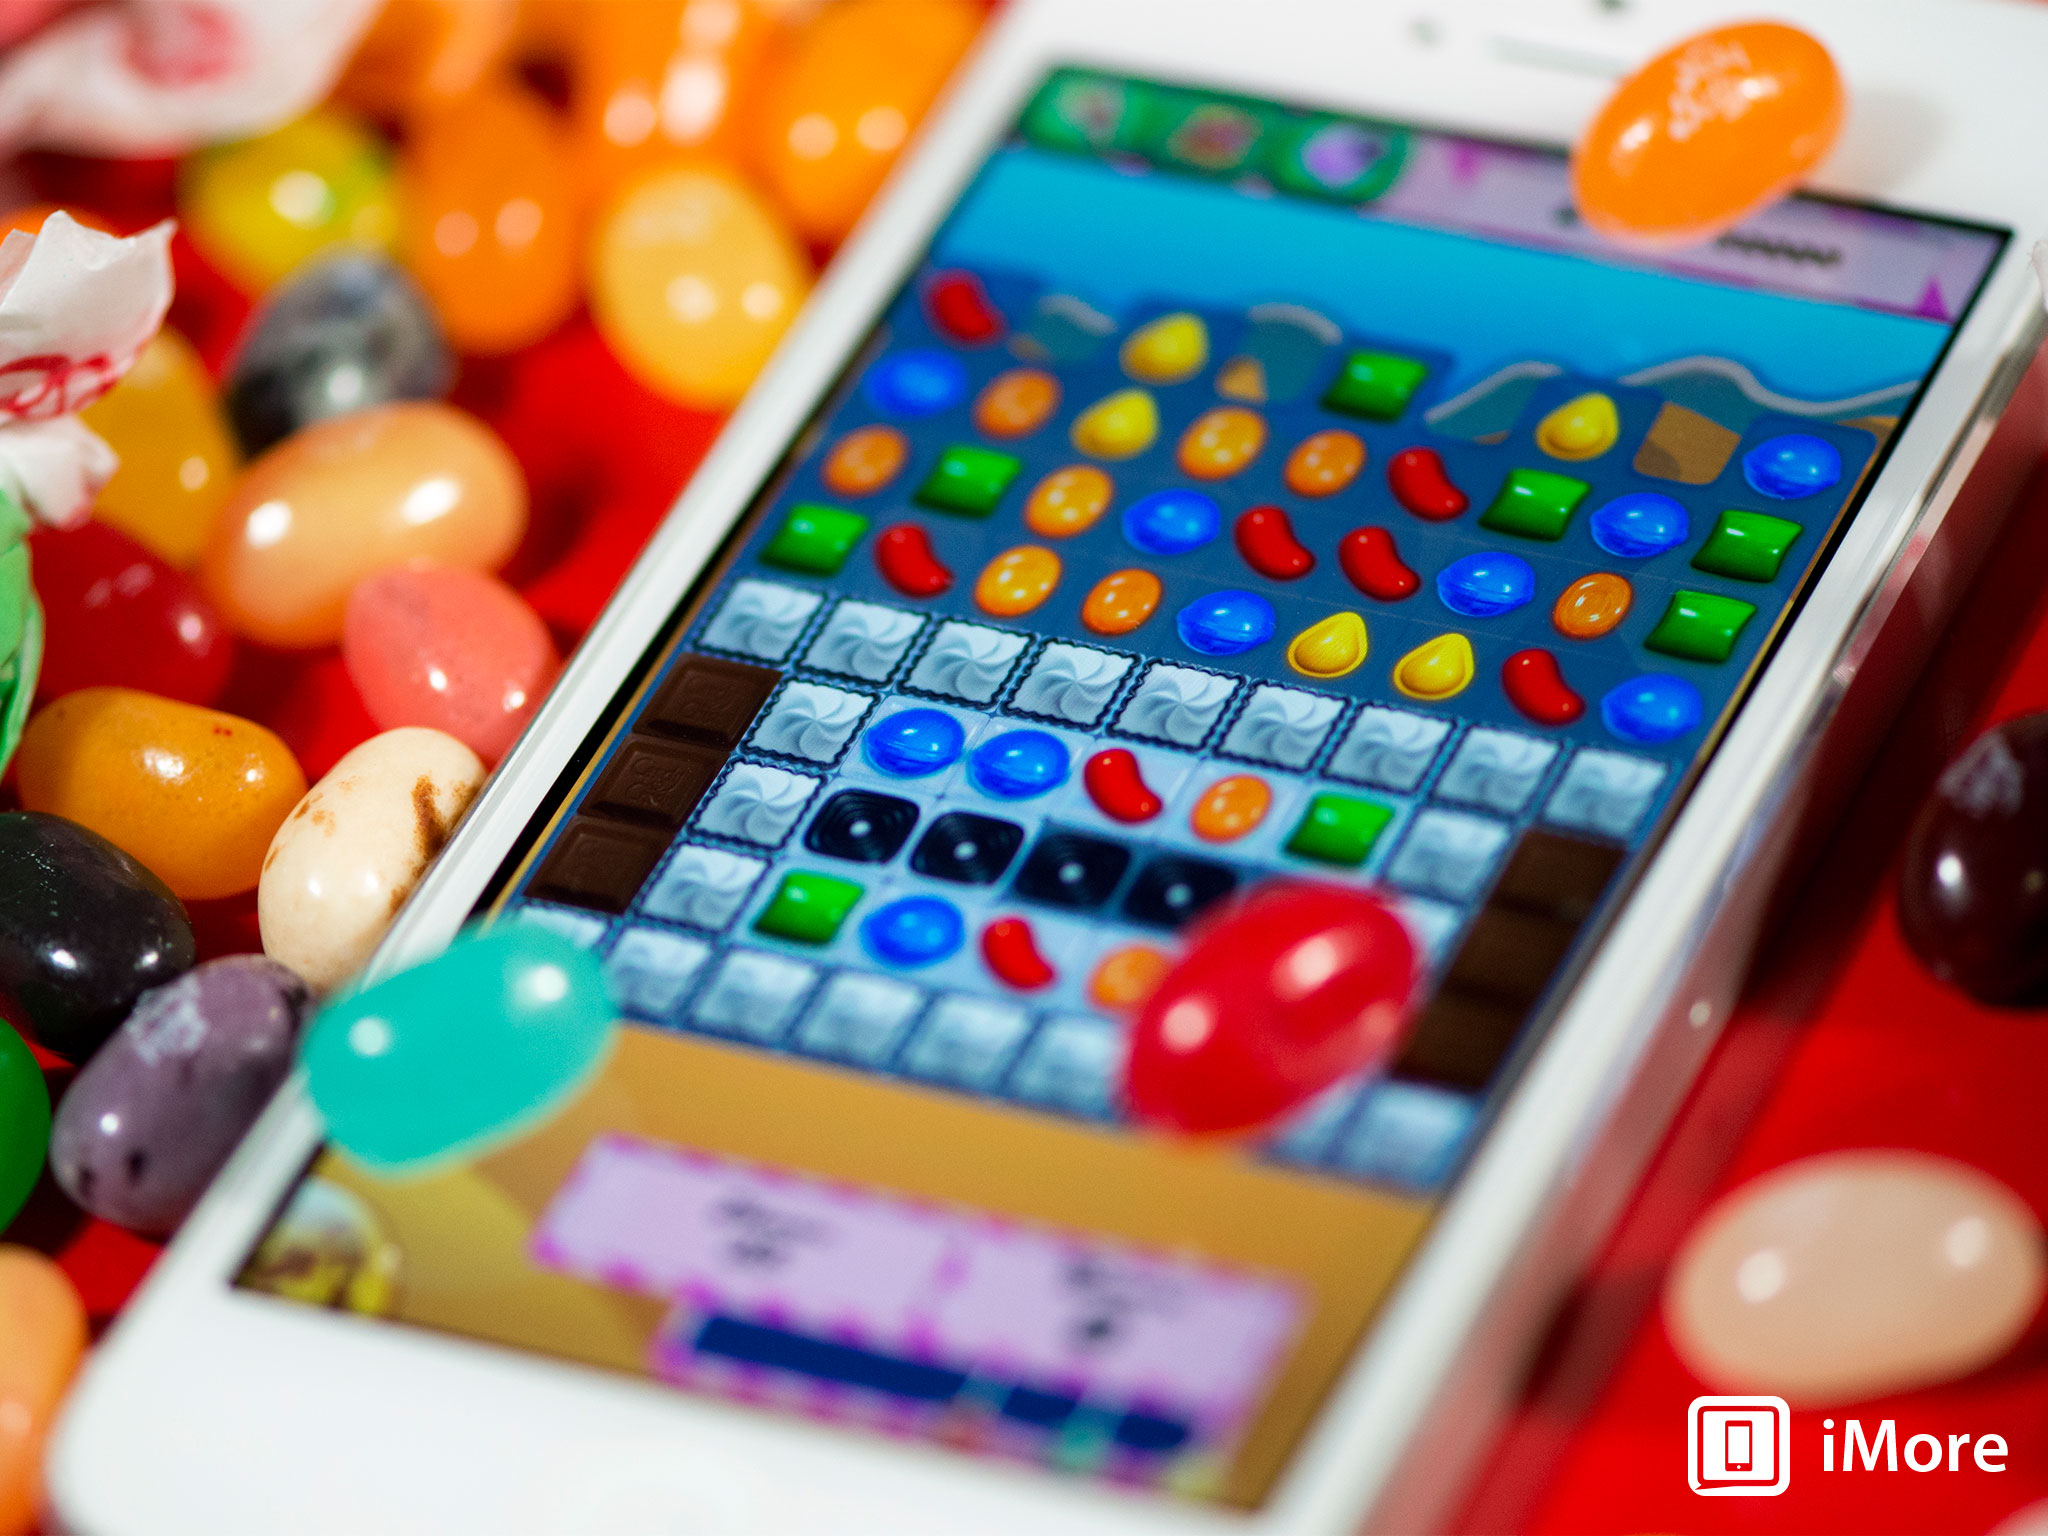 Candy Crush, Minion Rush, Simpsons Tapped Out, and more! How to cheat and beat the most addictive iPhone games!